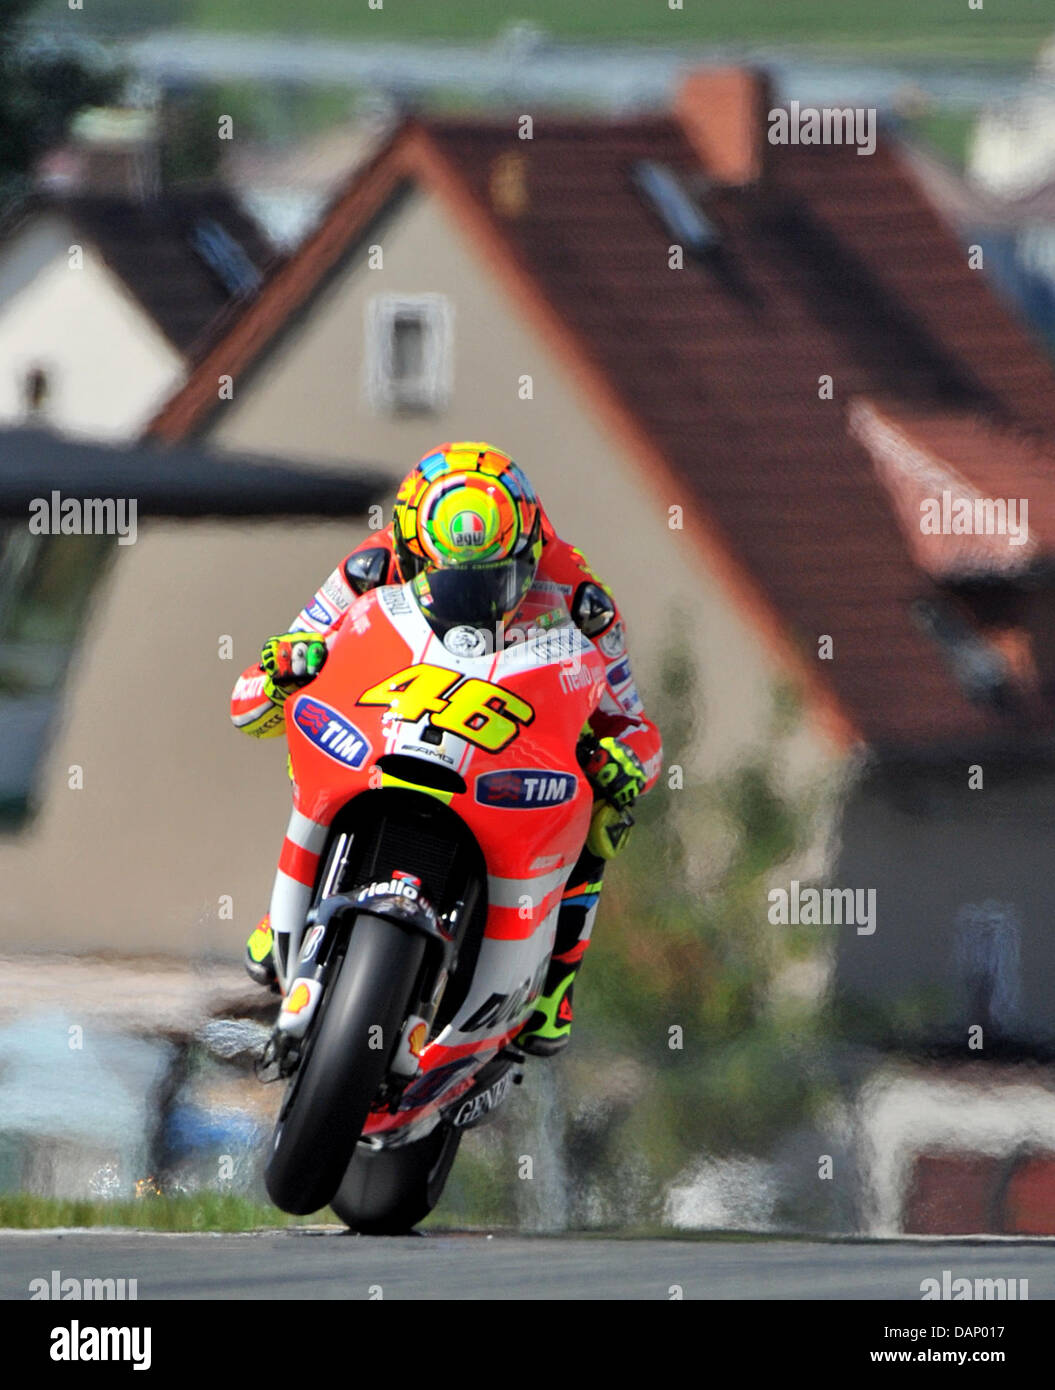 The Italian Ducati driver Valentino Rossi drives his motorcycle in a MotoGP race training on the Sachsenring circuit in Hohenstein-Ernstthal, Germany, 16 July 2011. Photo: Jan Woitas Stock Photo